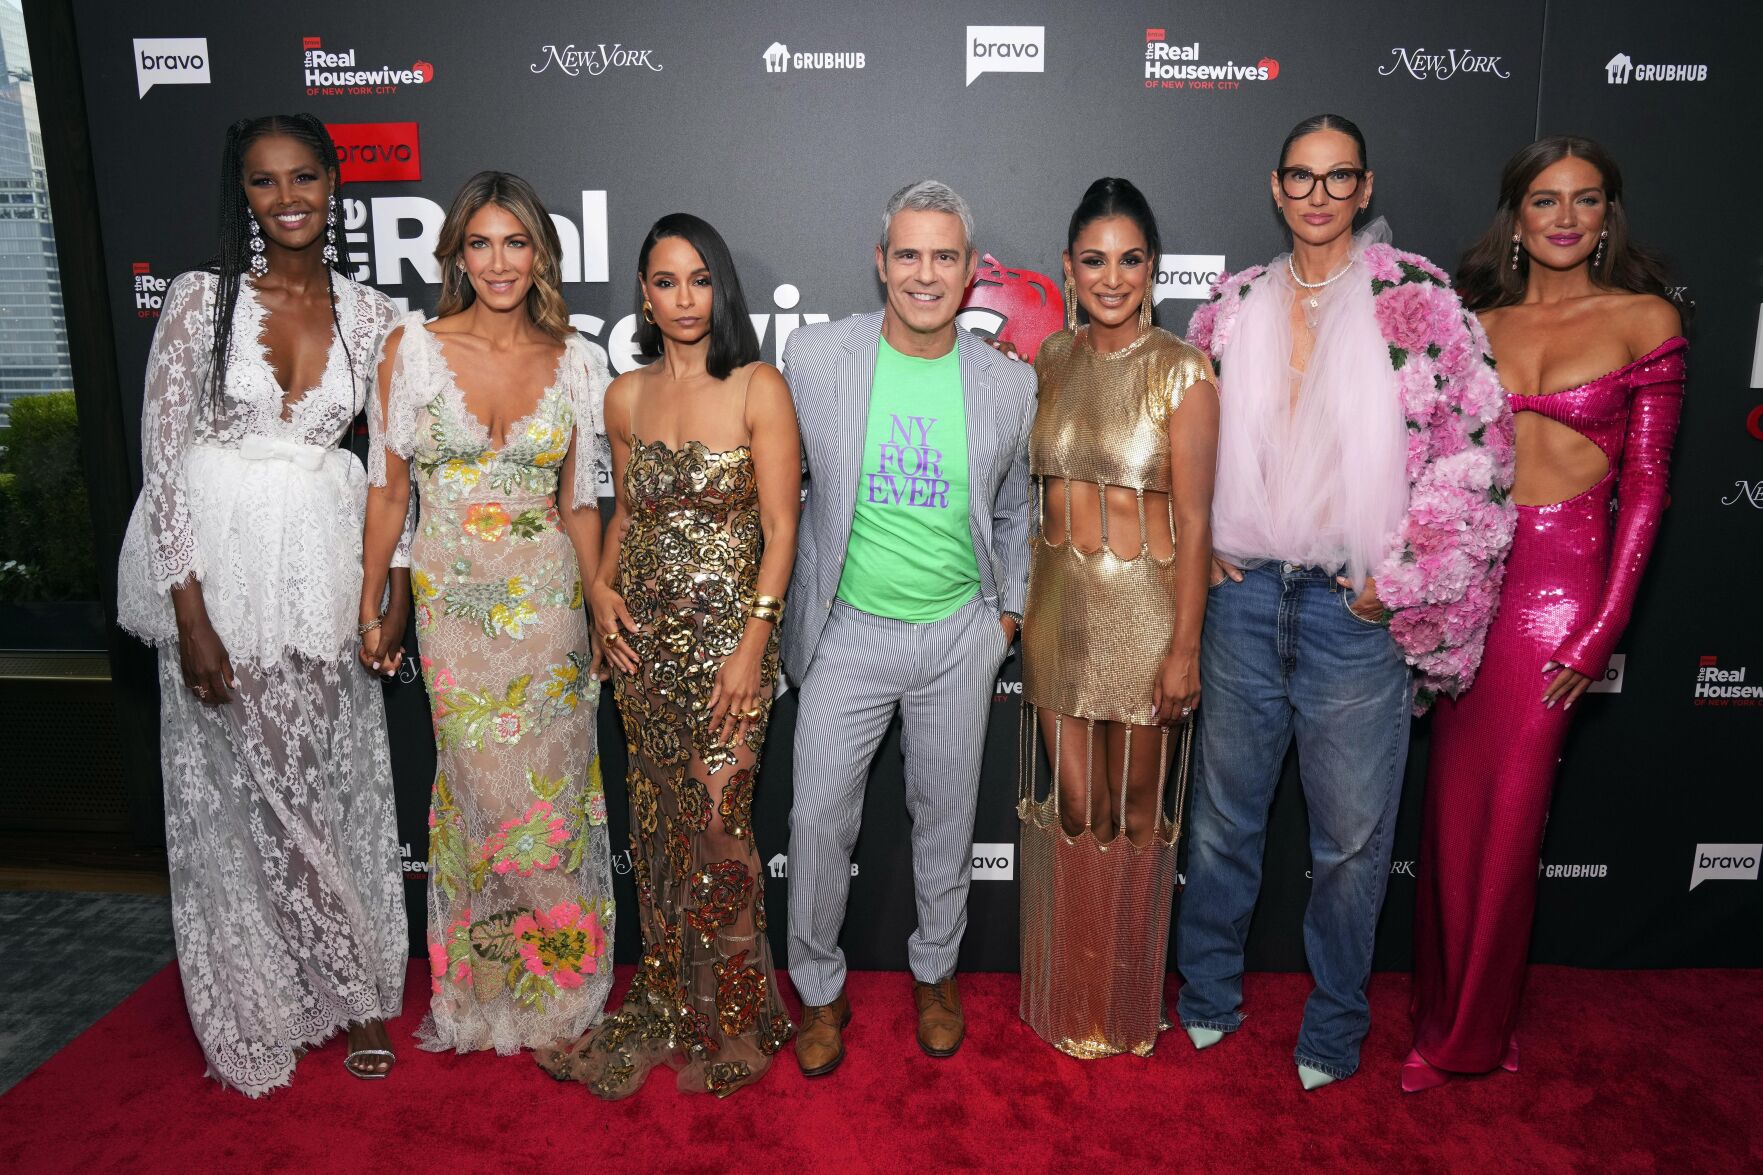 Ubah Hassan, from left, Erin Lichy, Sai De Silva, Andy Cohen, Jessel Taank, Jenna Lyons and Brynn Whitfield attend Bravo's "The Real Housewives of New York City" premiere party at the Rainbow Room on Wednesday, July 12, 2023, in New York. 